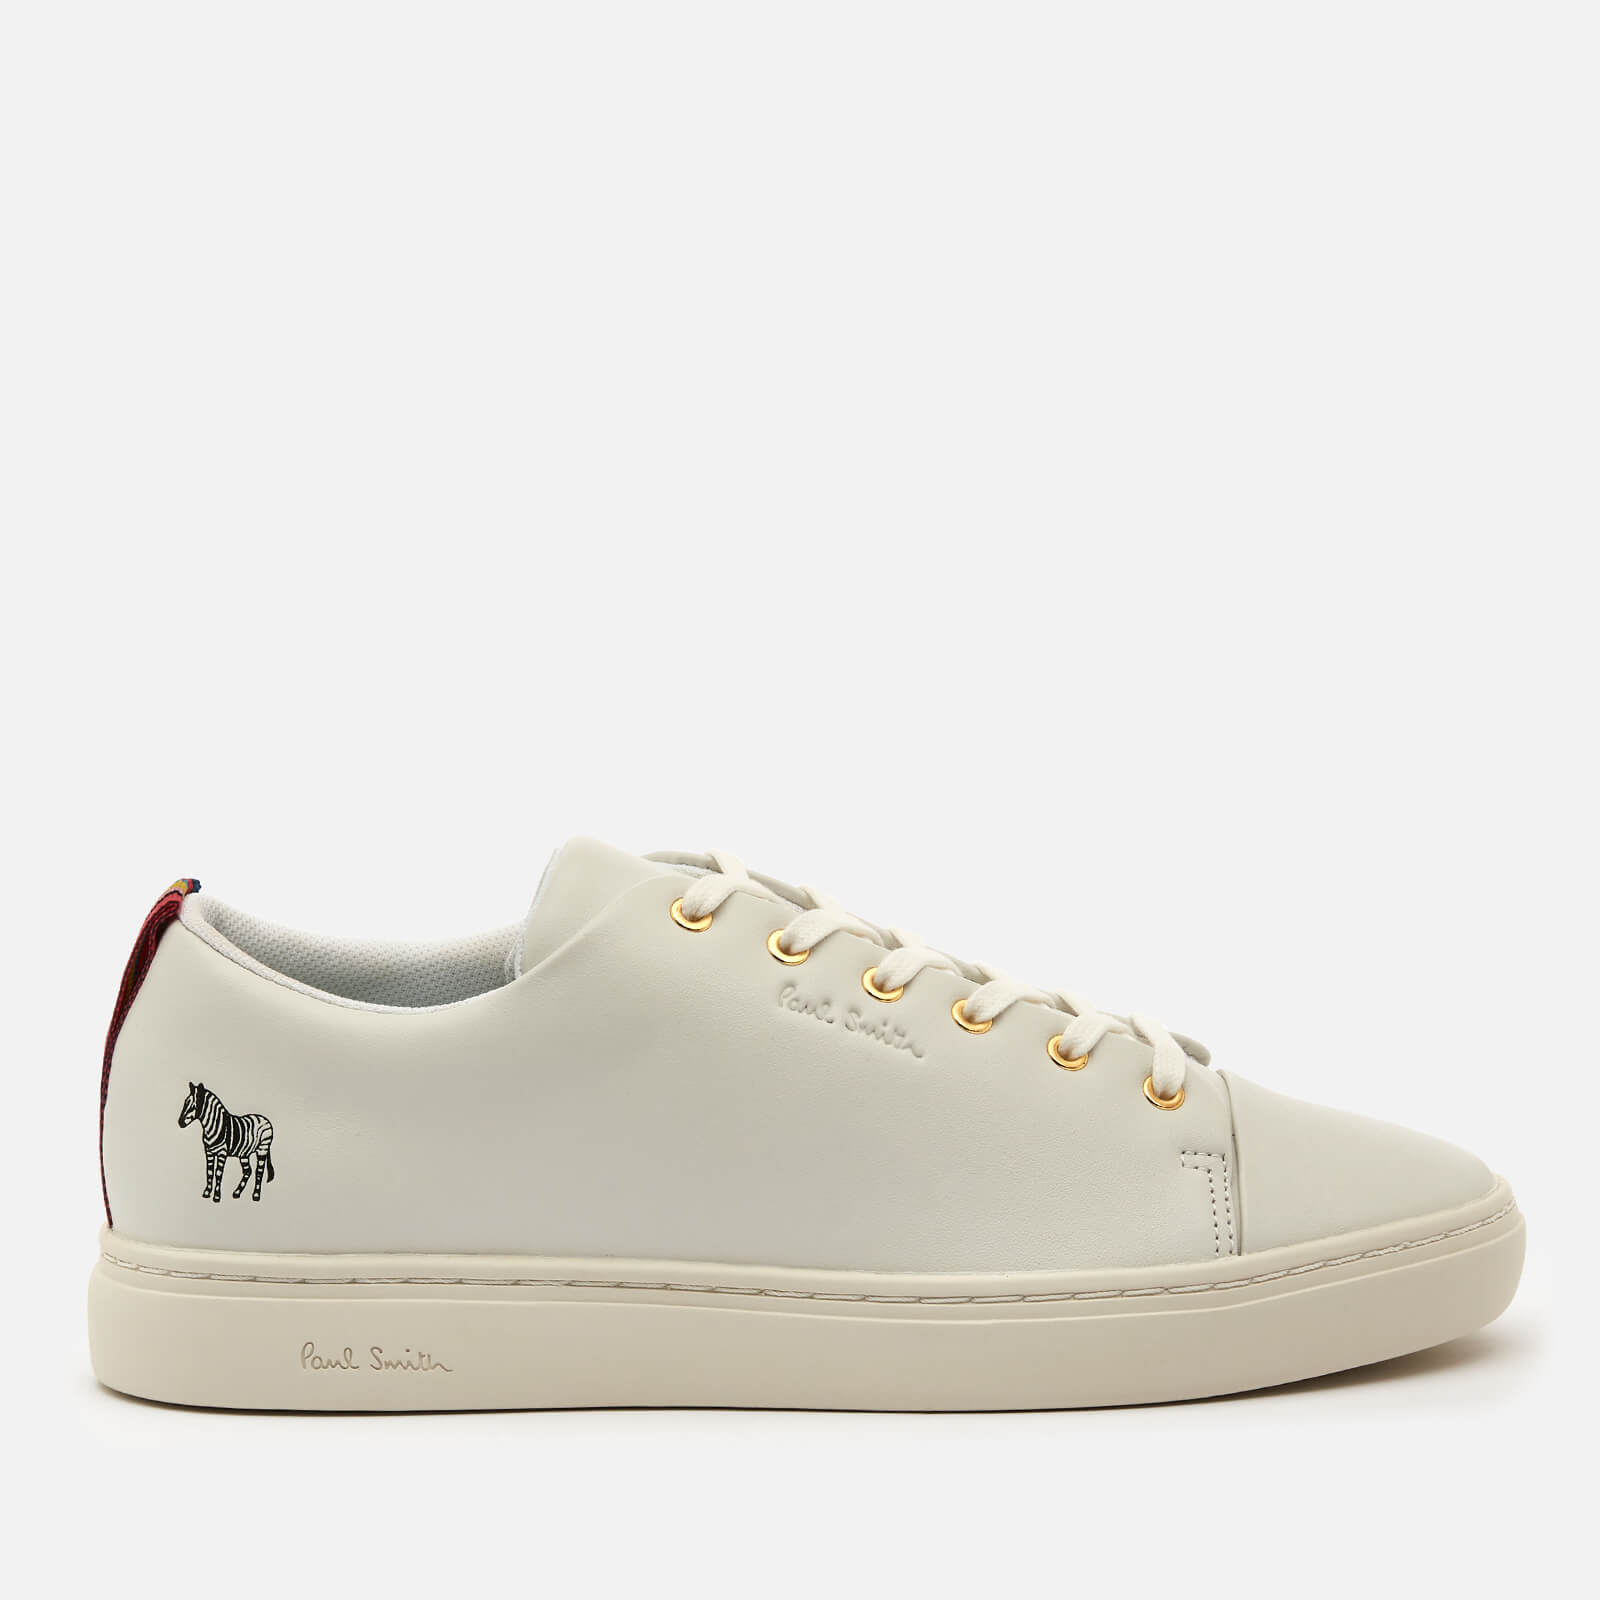 Paul Smith Women’s Lee Leather Cupsole Trainers - White